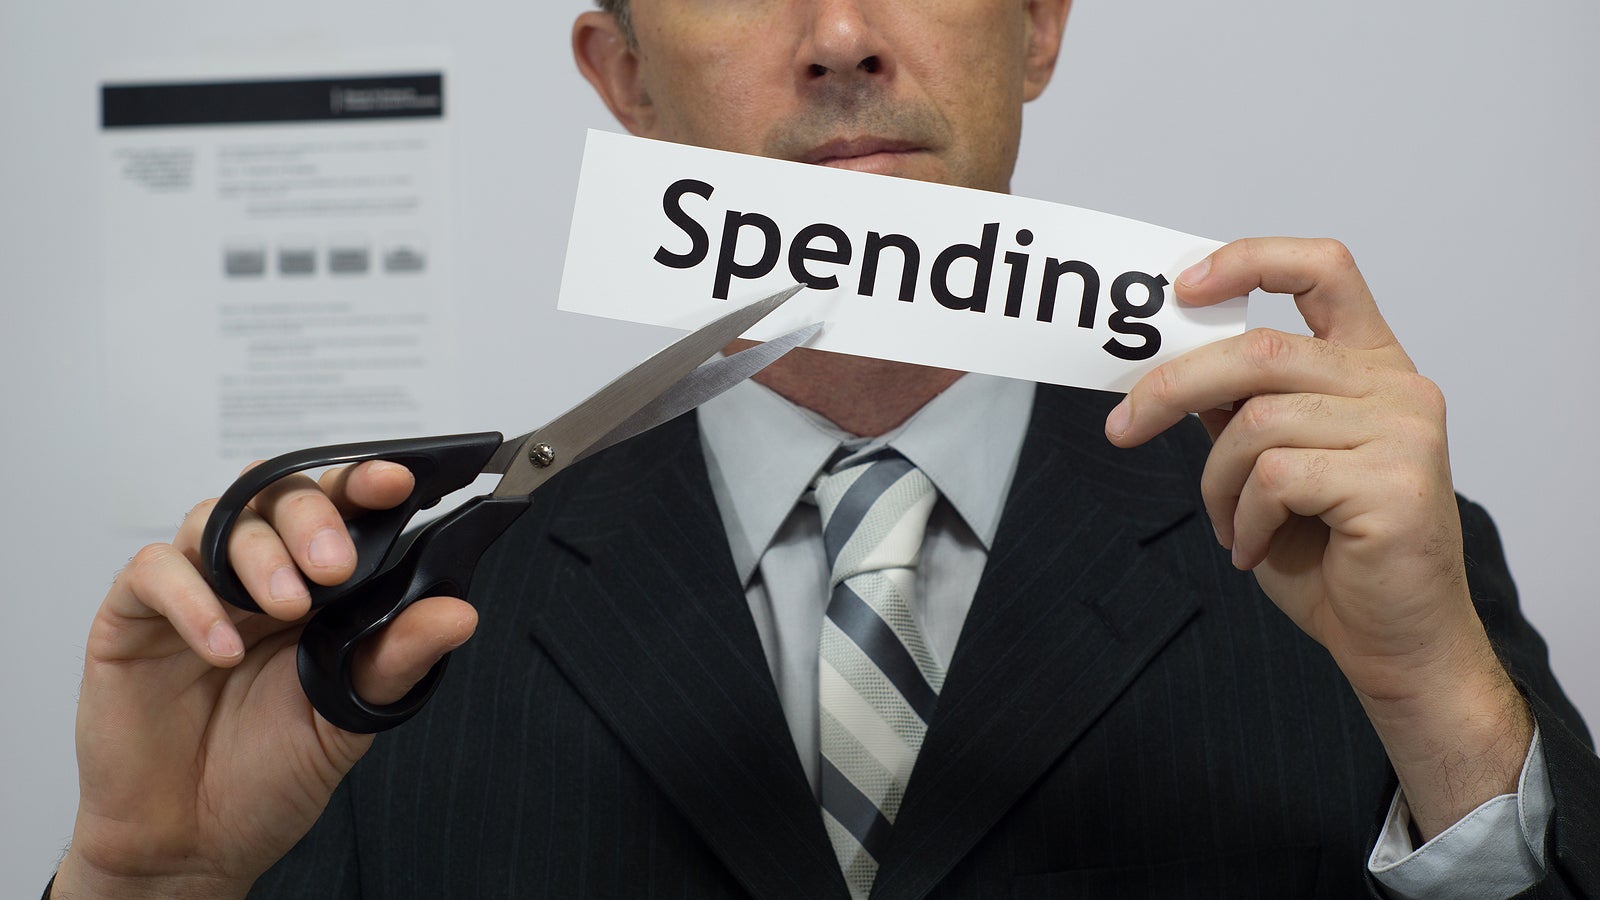 Male office worker or businessman in a suit and tie cuts a piece of paper with the word spending on it as a spending or expense reduction business concept.